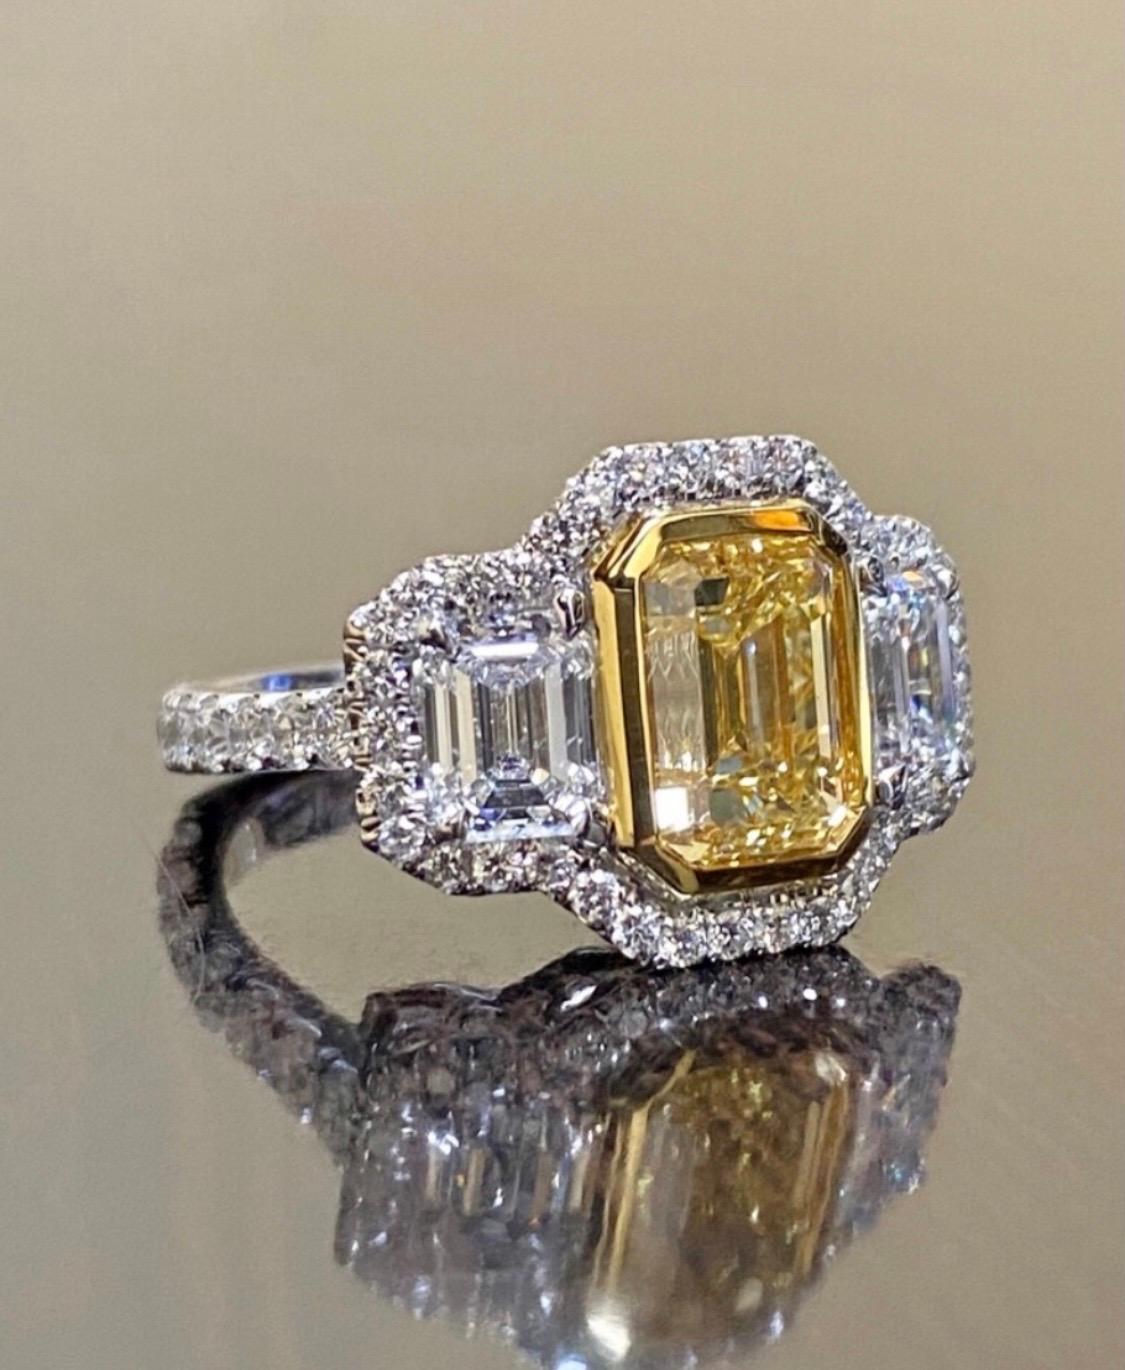 GIA Certified 3.02 Carat Emerald Cut Fancy Yellow Diamond Engagement Ring For Sale 4